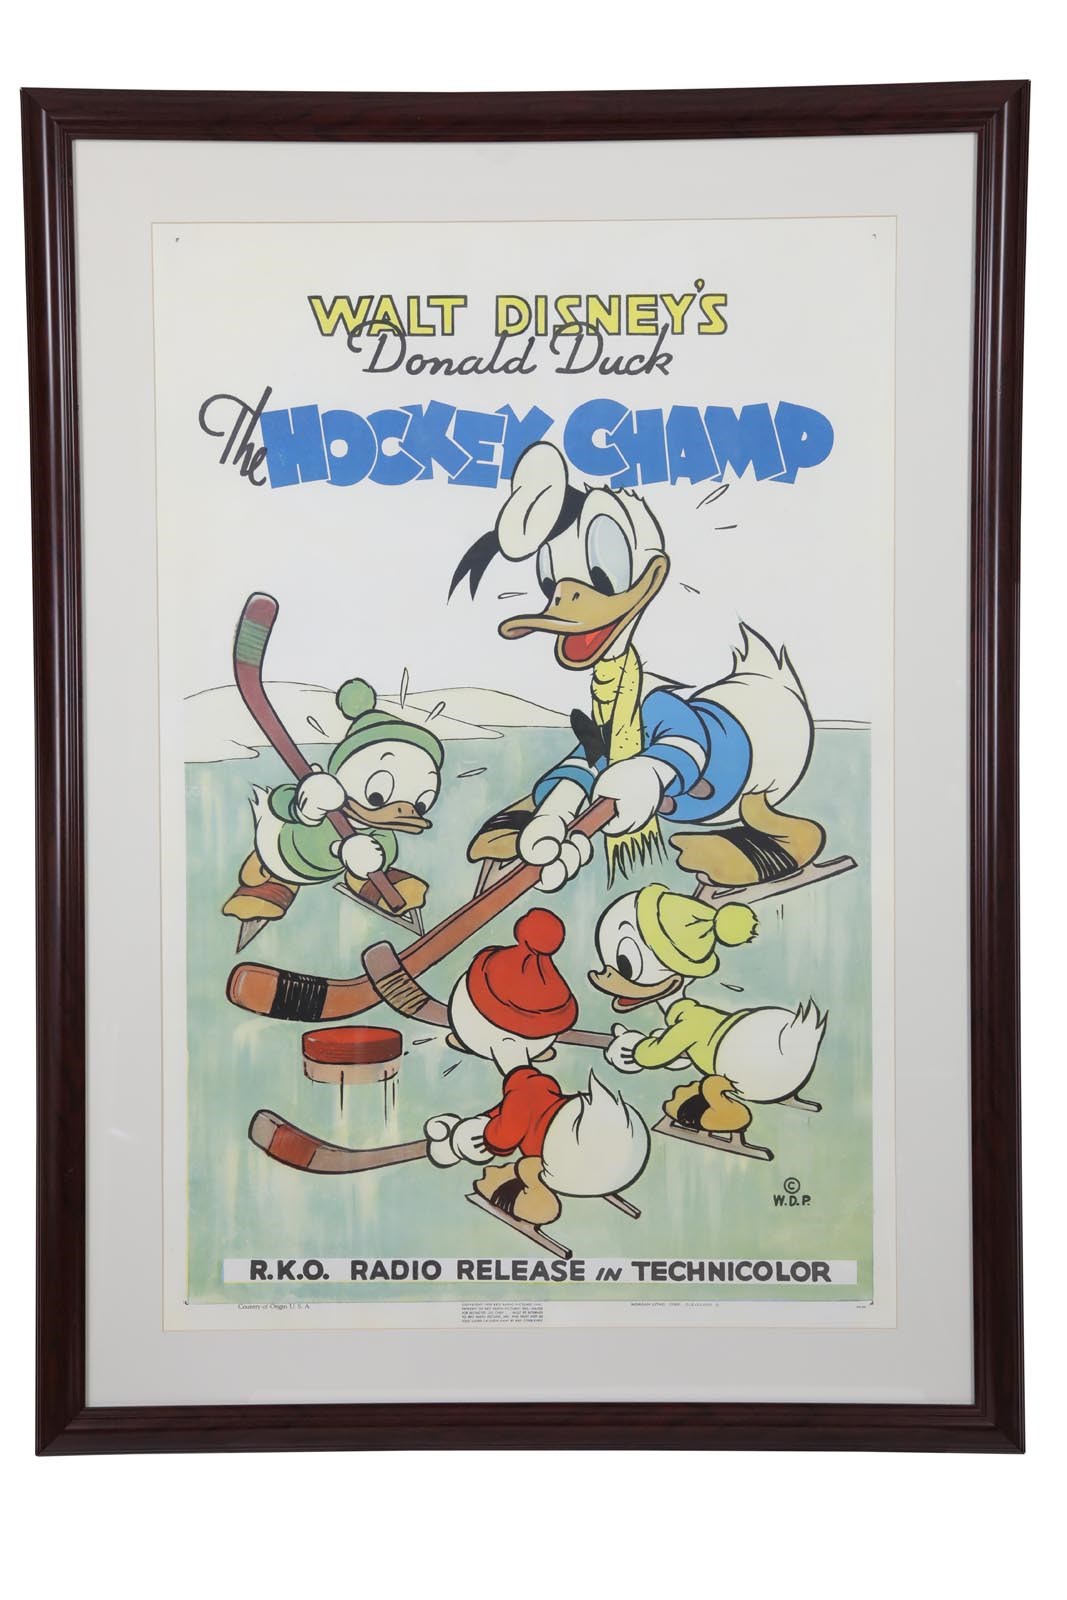 - 1939 Donald Duck "The Hockey Champ" Original Release Movie Poster